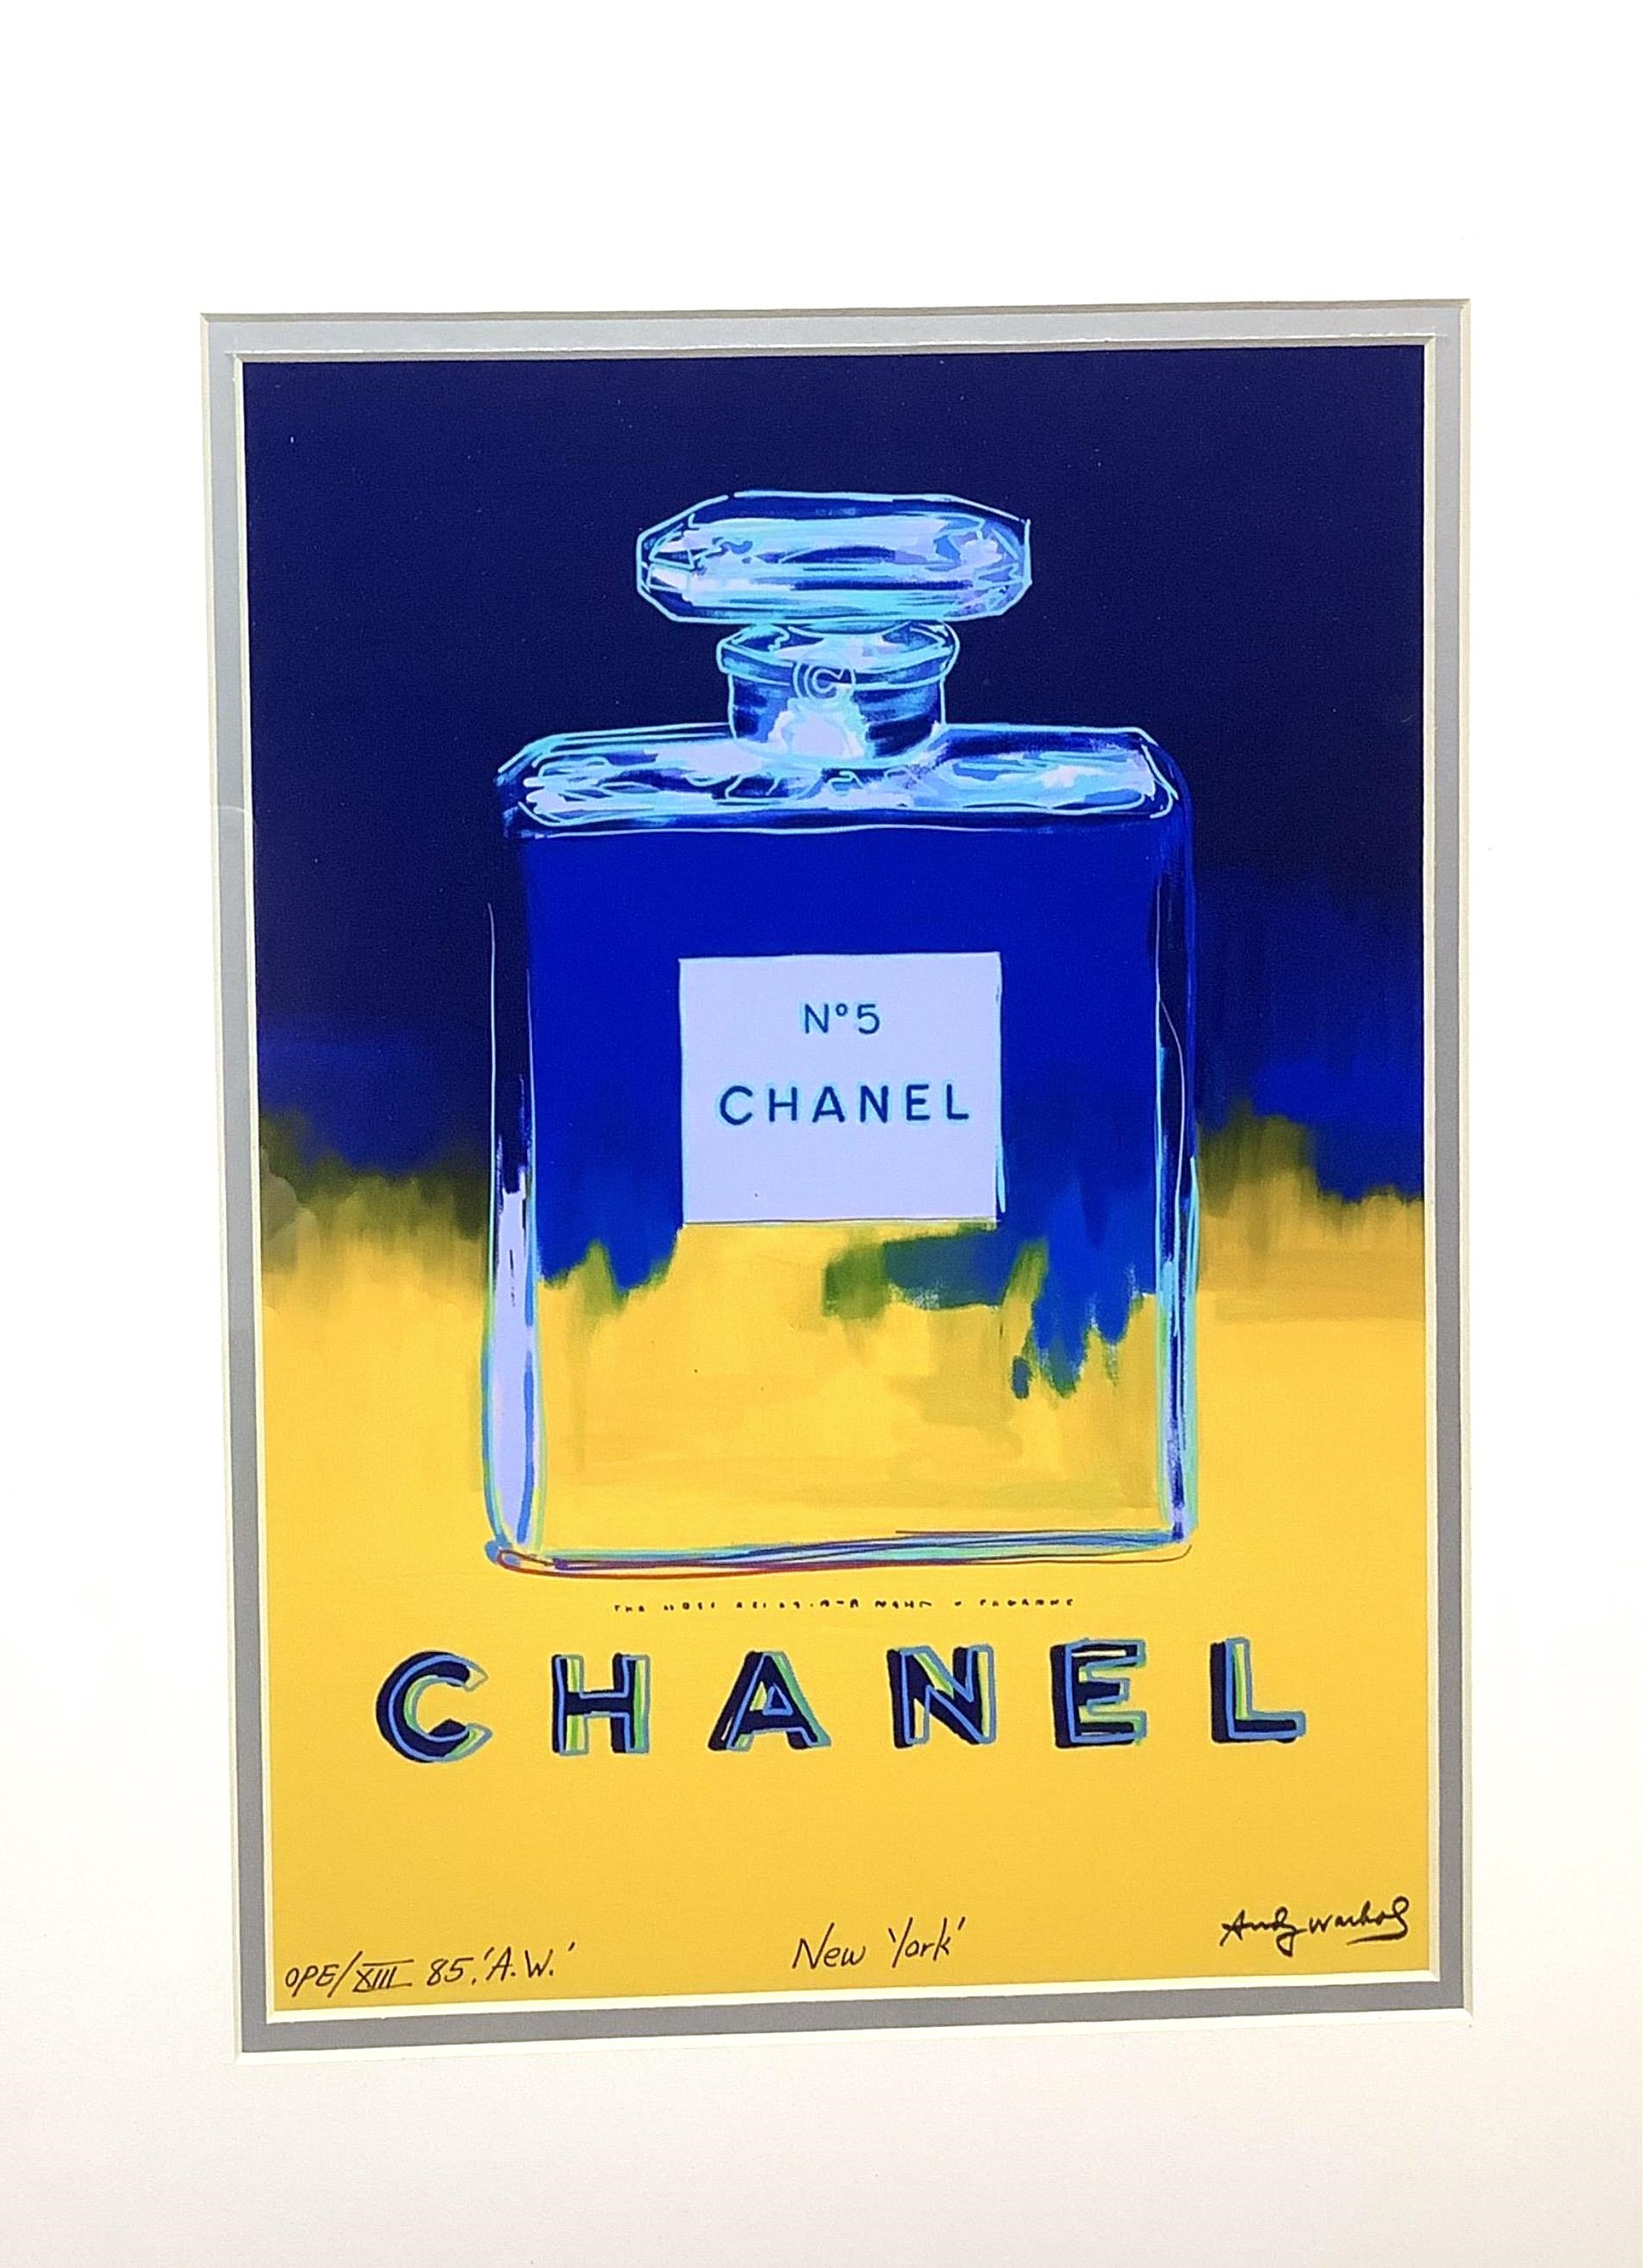 Chanel No.5. by Andy Warhol